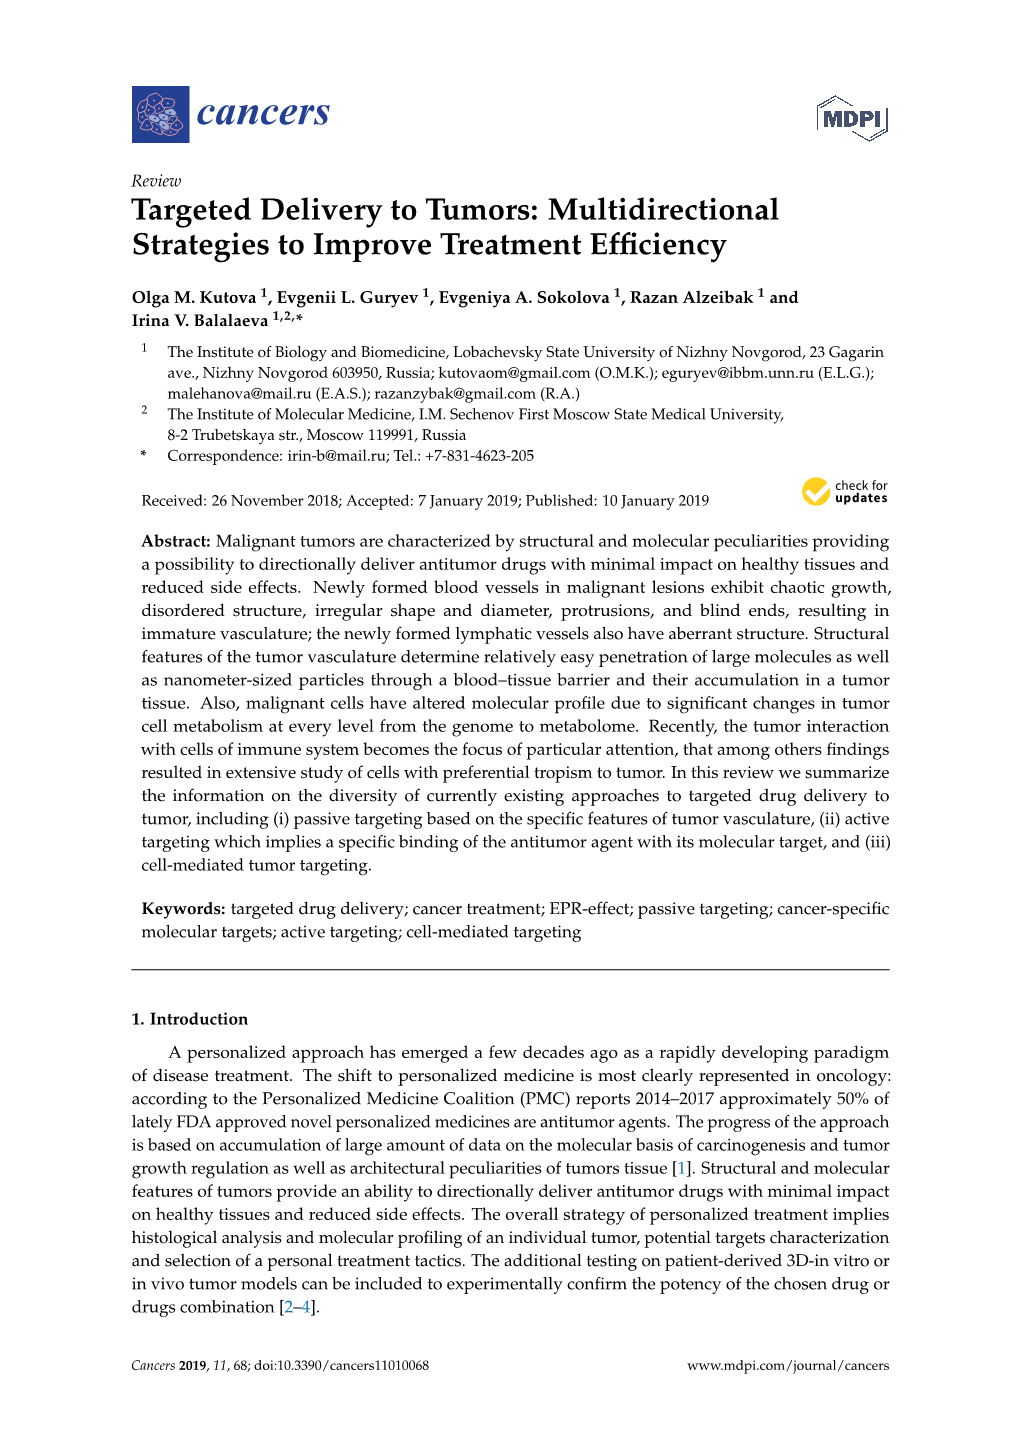 Targeted Delivery to Tumors: Multidirectional Strategies to Improve Treatment Efﬁciency